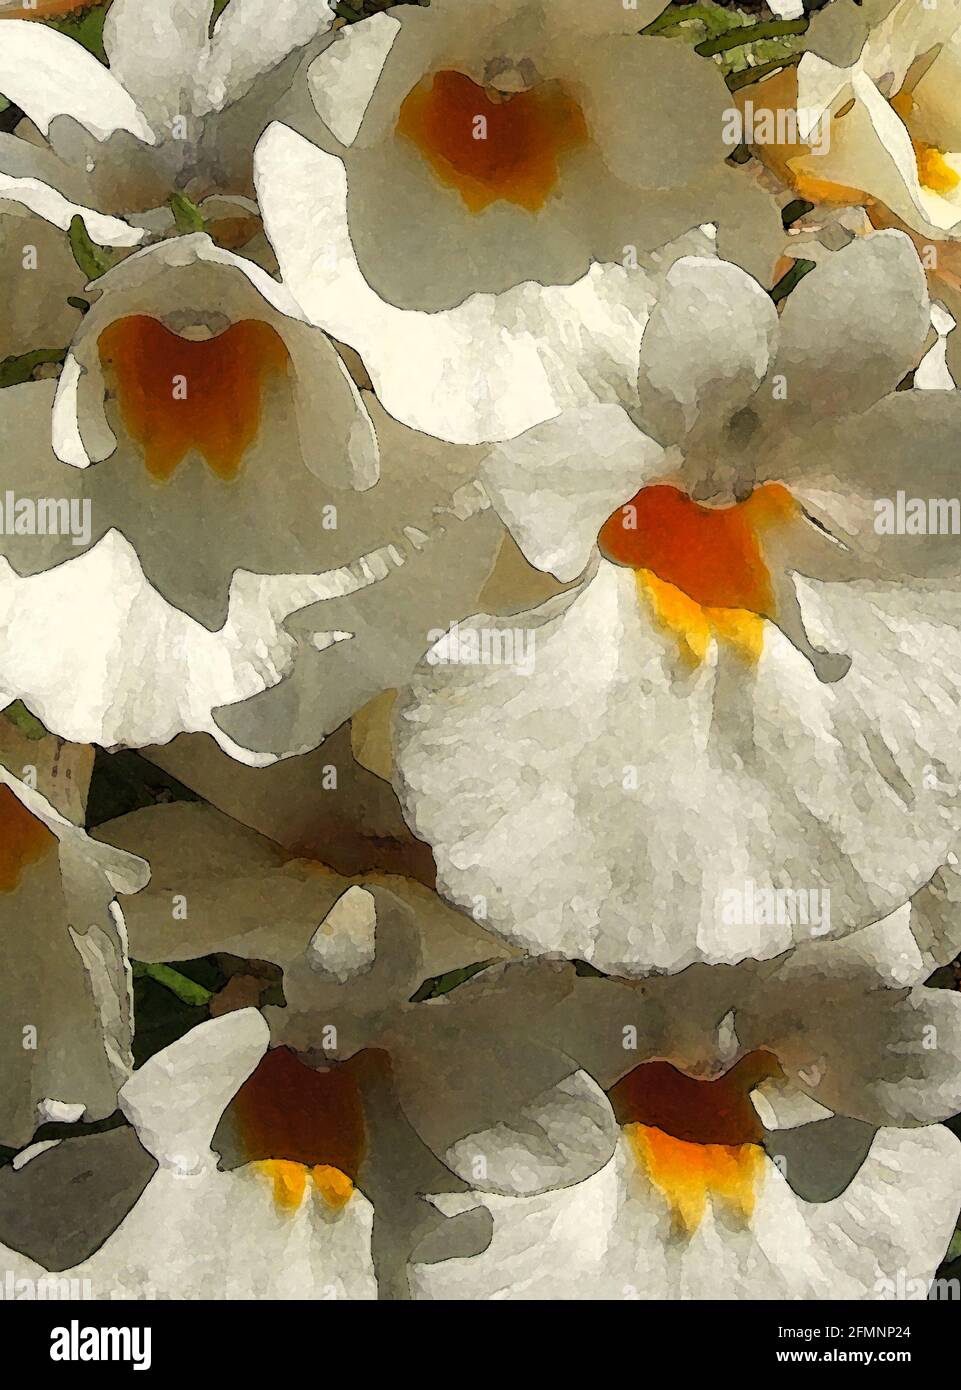 Nemesia (Nemesia strumosa) One of Forty-two Iconic Images of English Garden Flowers, Wildflowers and Rural Landscapes. Stock Photo